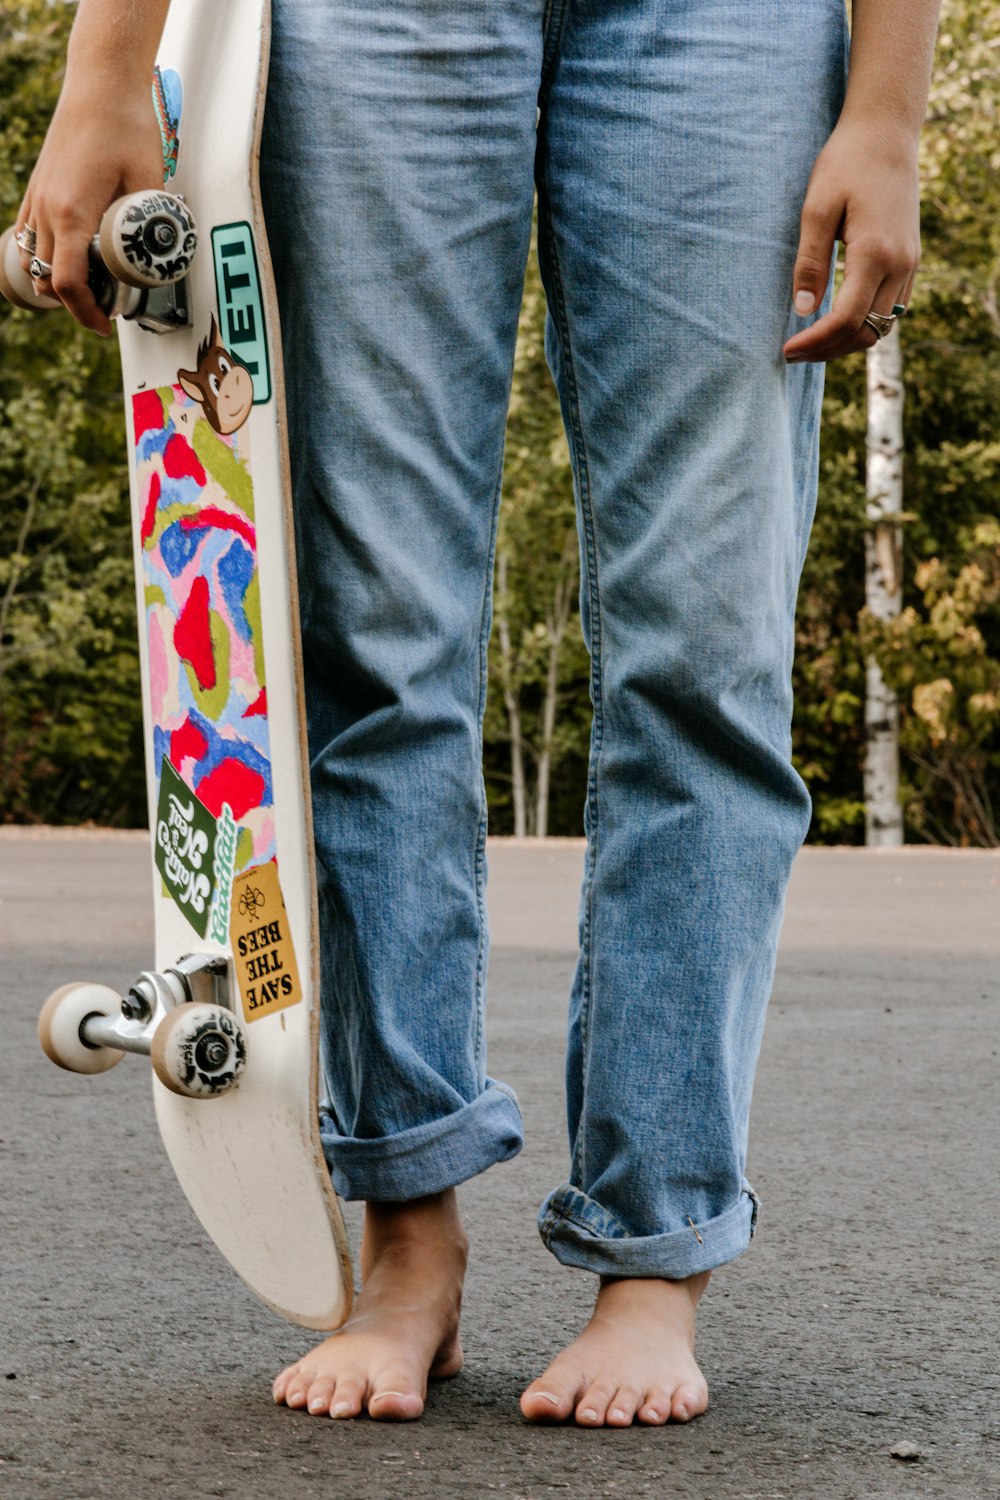 person in blue denim jeans riding skateboard during daytime